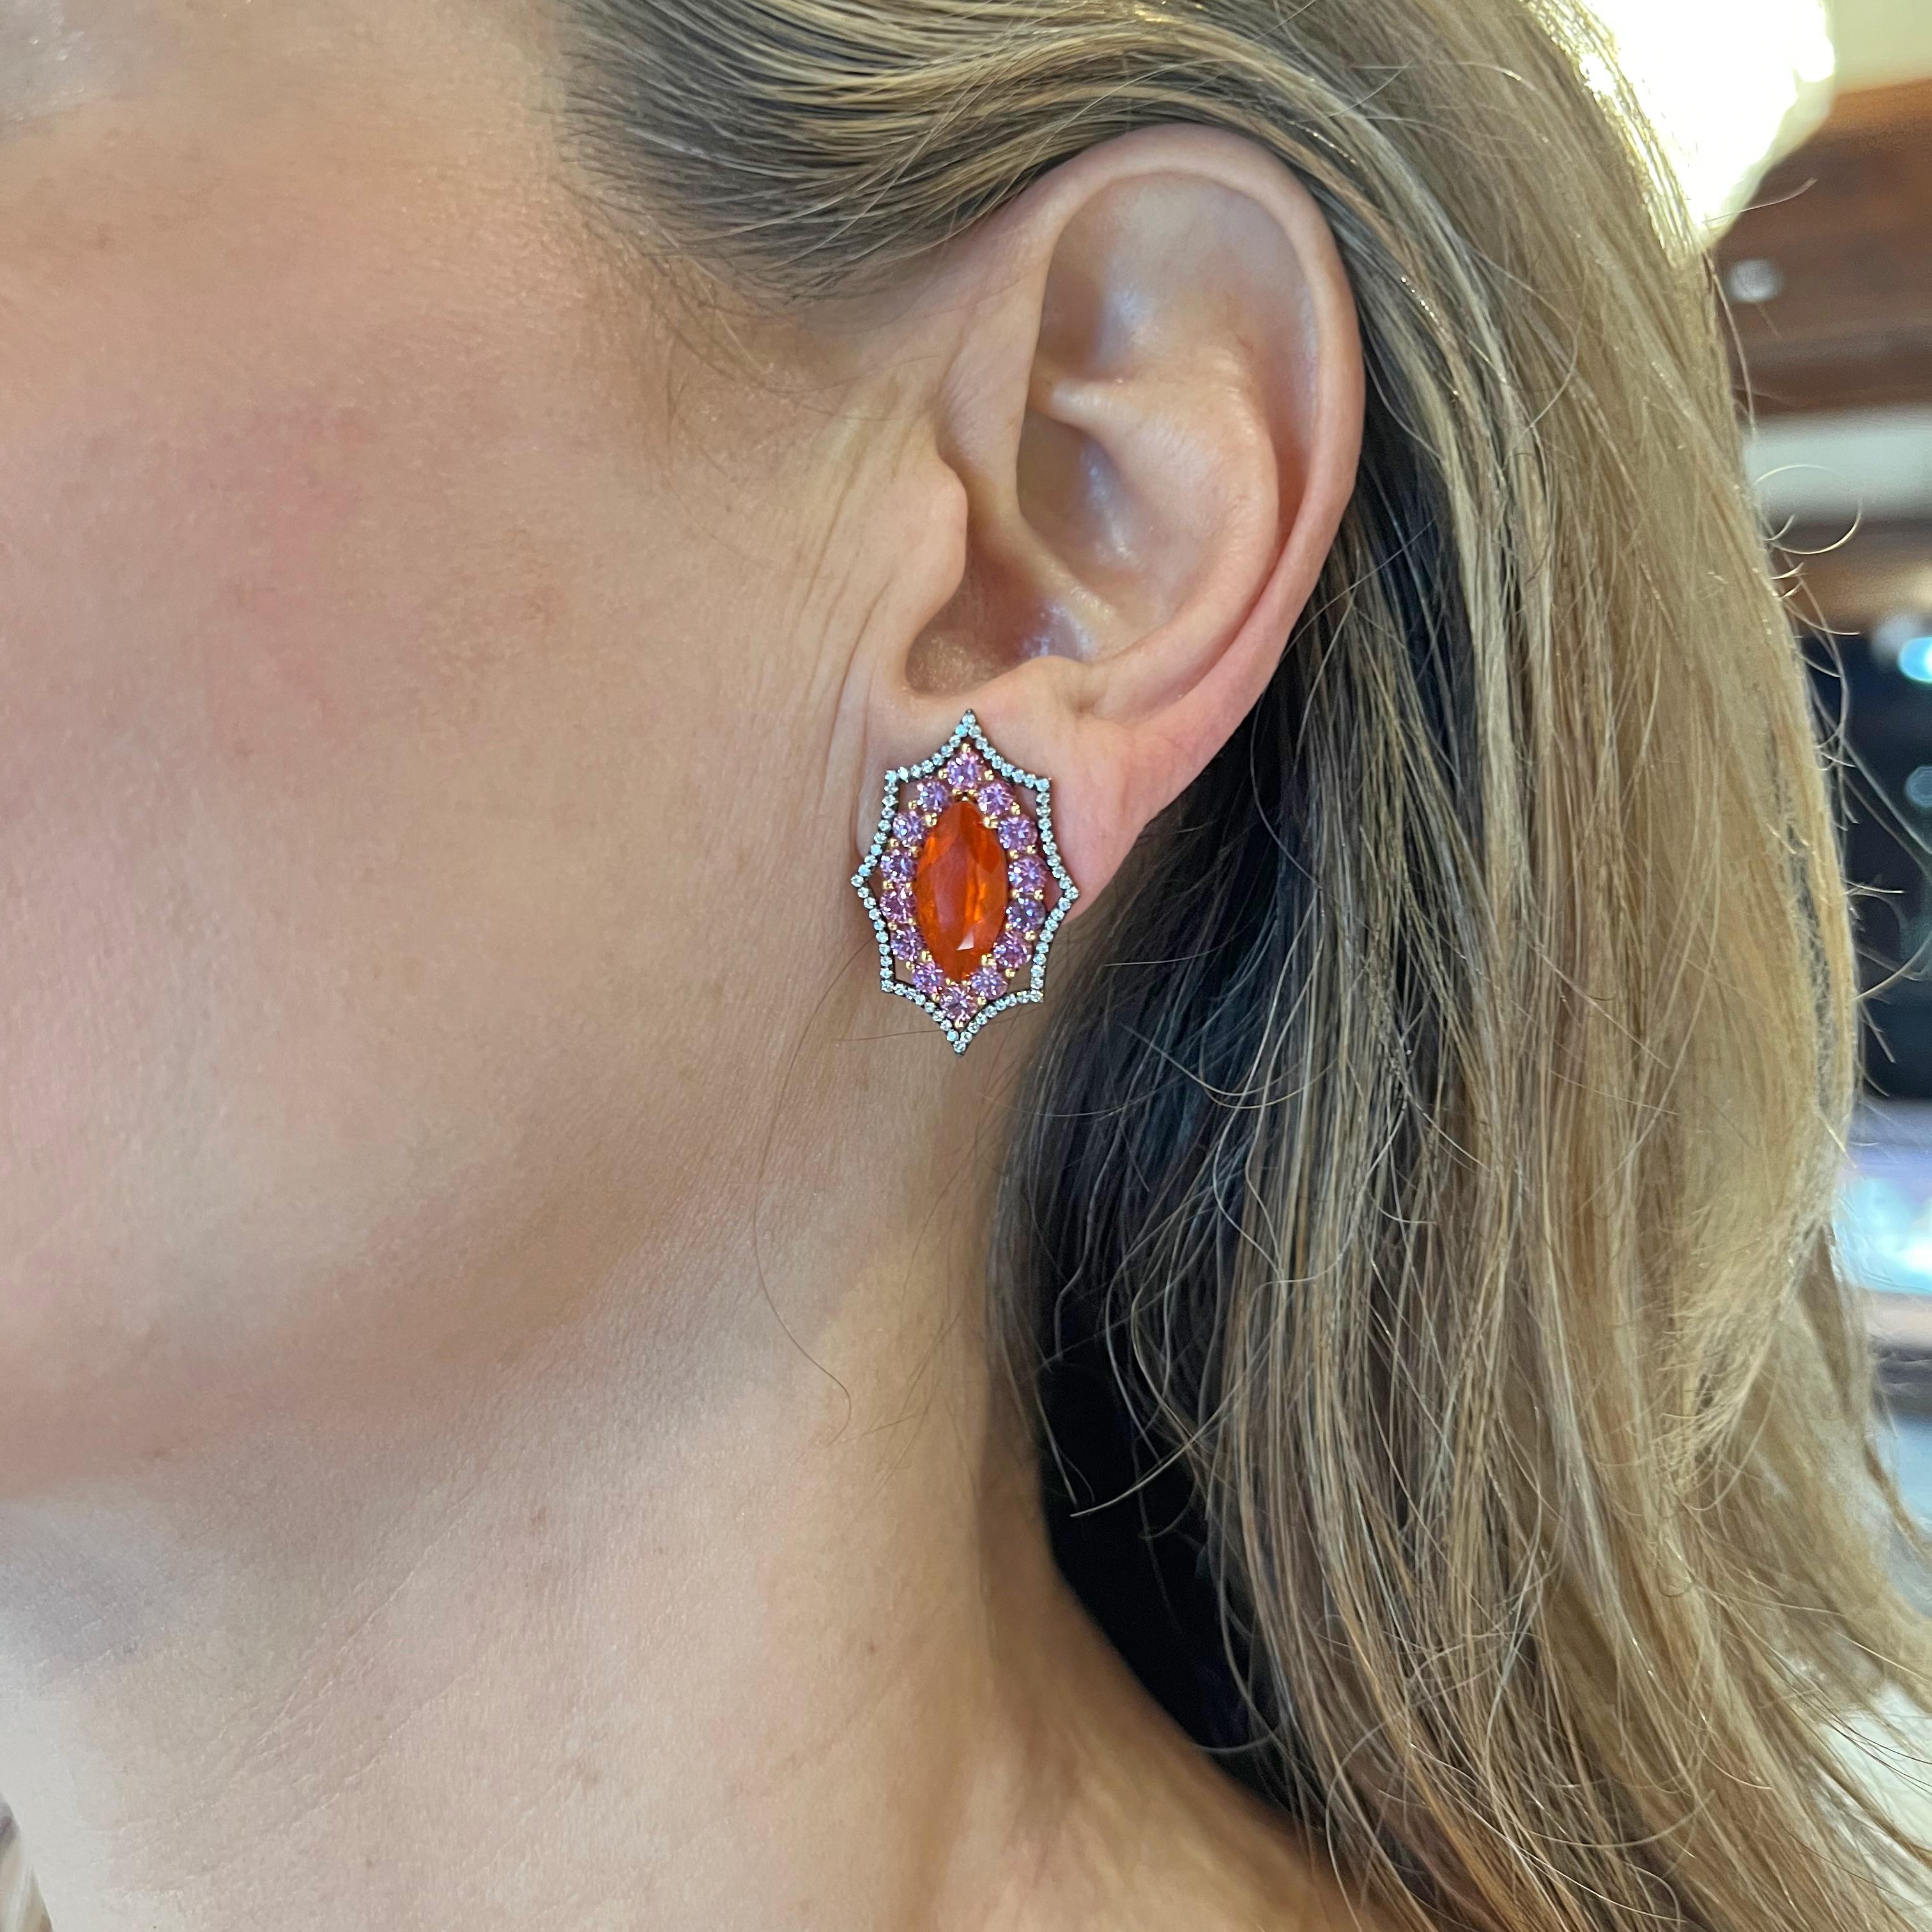 Multicolored gem-set earrings in 18k gold created by Bella Campbell- a part of the Campbellian Collection. Each centering a marquise-shaped Mexican fire opal surrounded by purplish-pink sapphires and round brilliant-cut diamonds.  Two fire opals